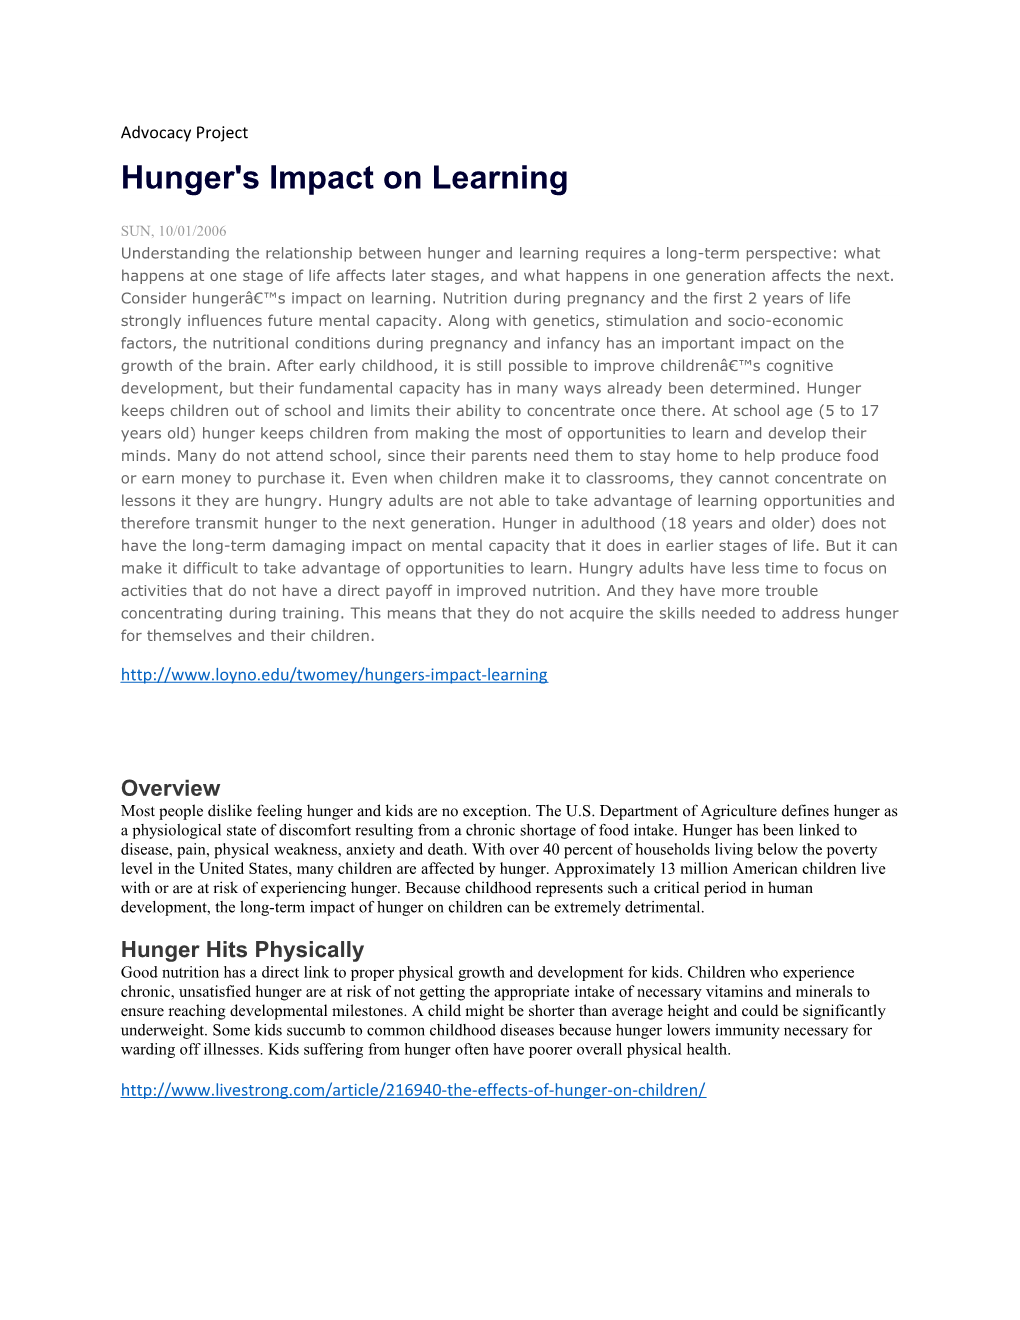 Hunger's Impact on Learning